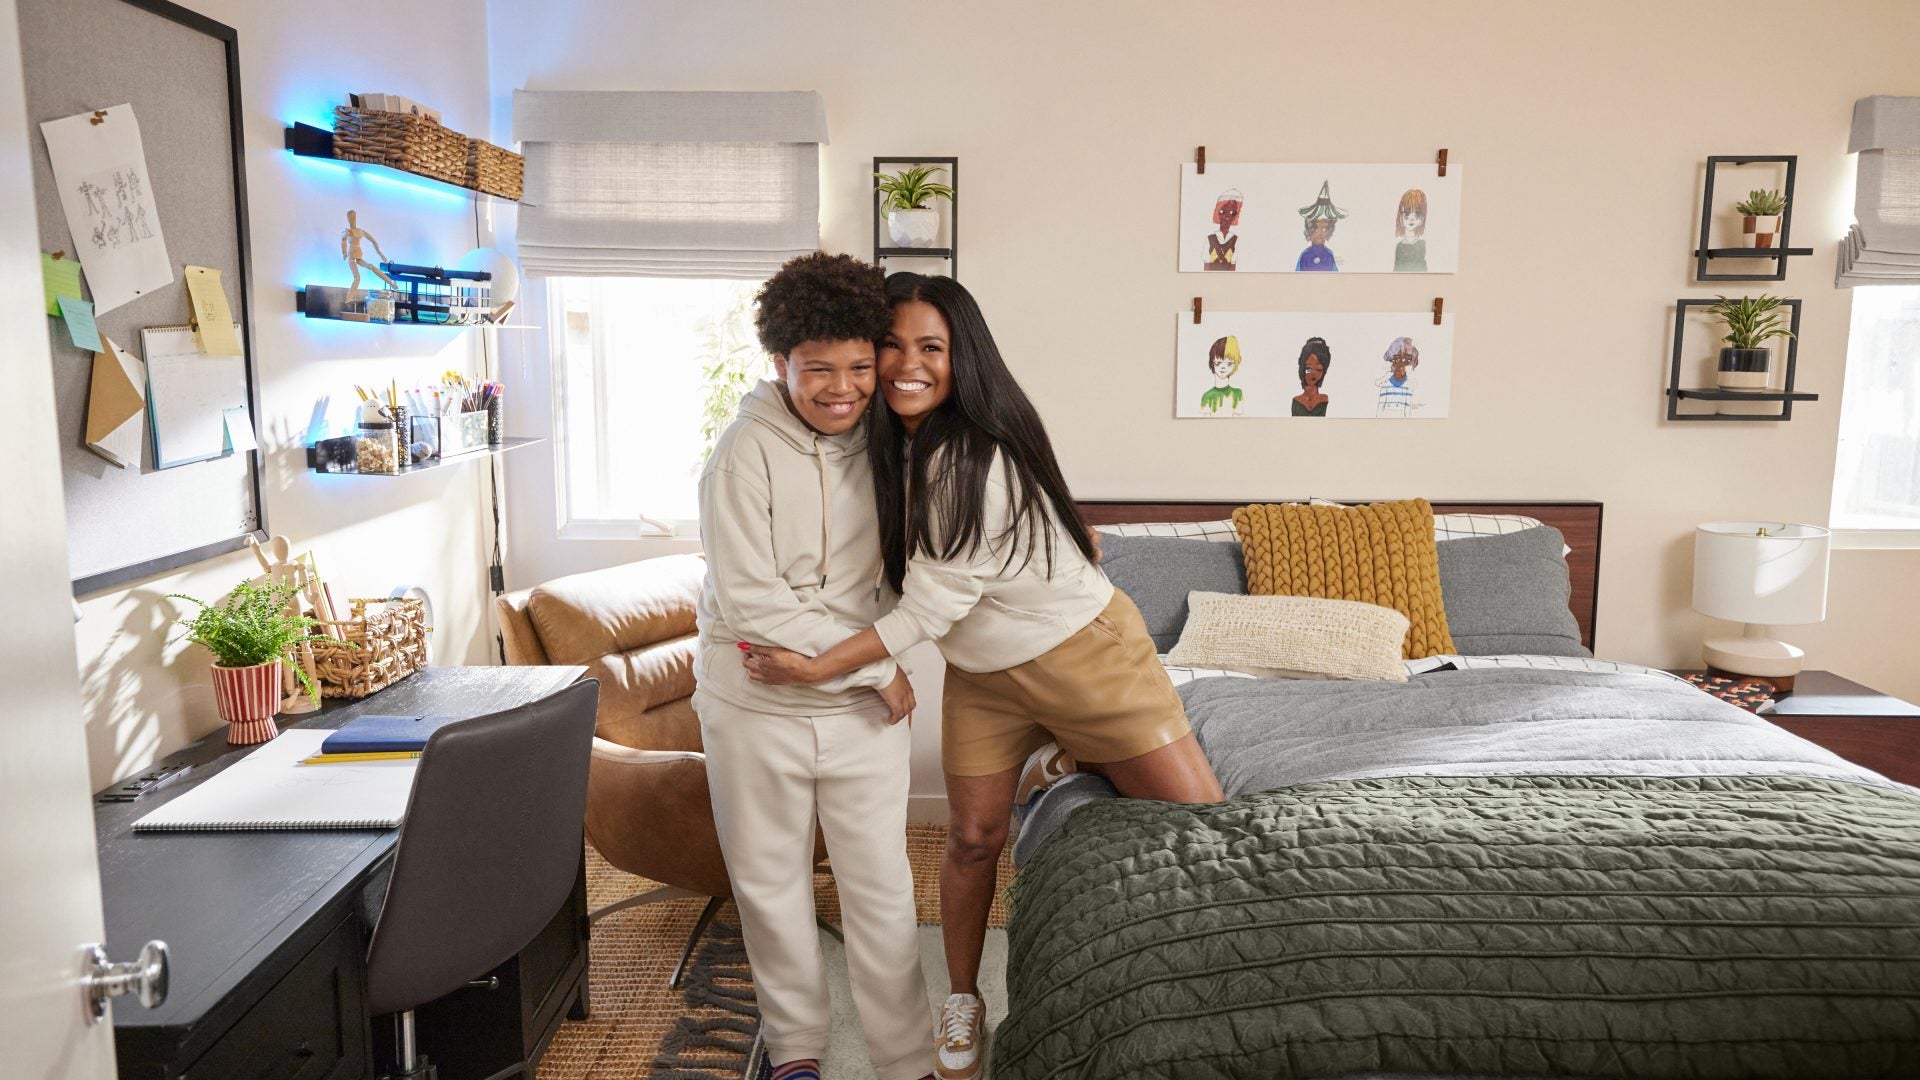 Home Style: Inside The Bedroom Meets Art Studio Nia Long Created For Son Kez